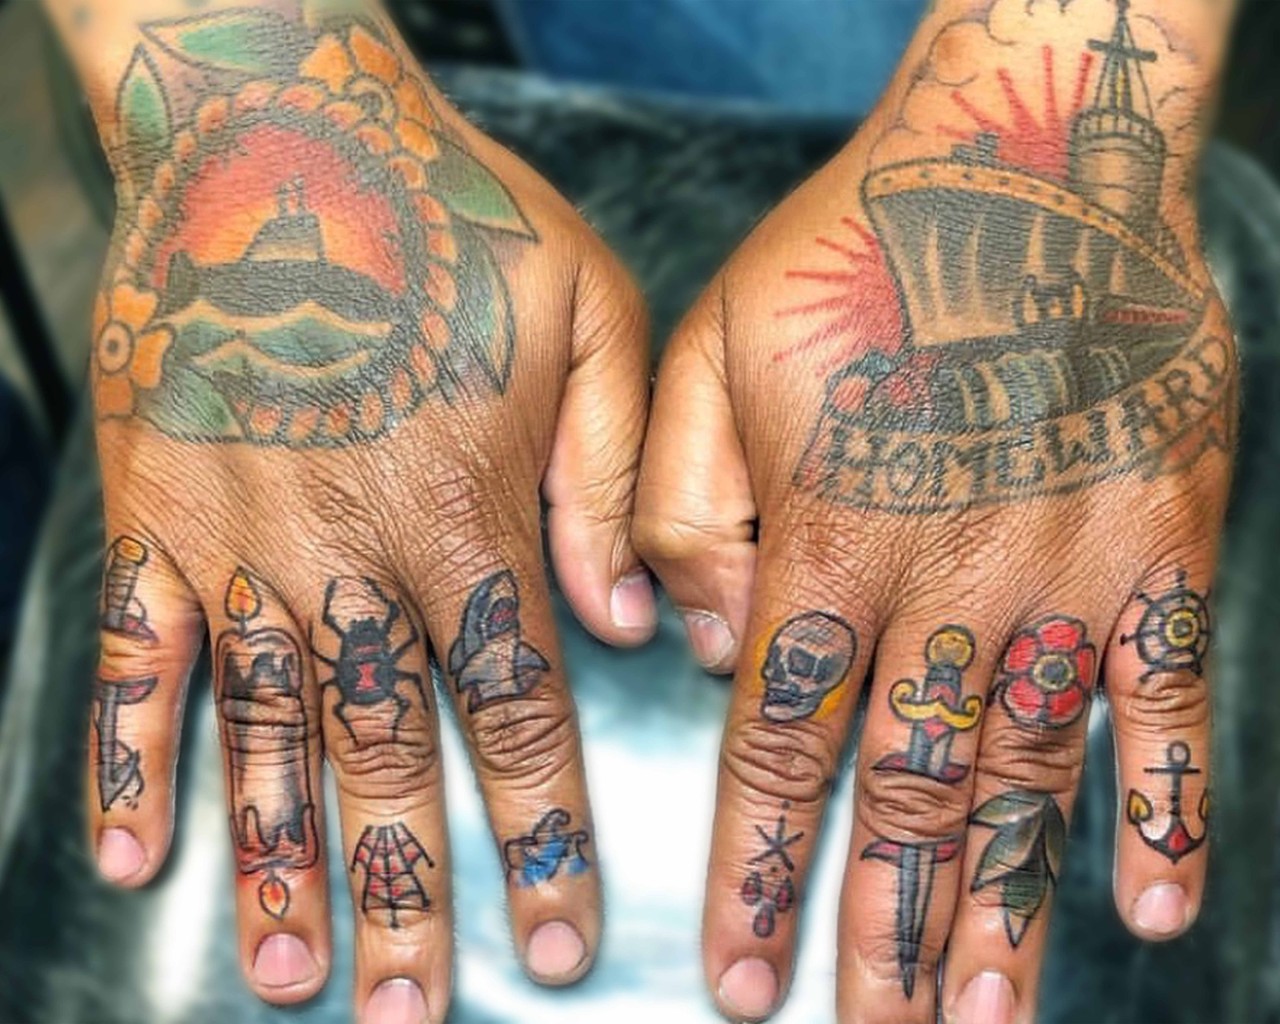 Hand tattoos of a submarine, battleship with the word "homeward," and individual finger tattoos of various nautical designs.